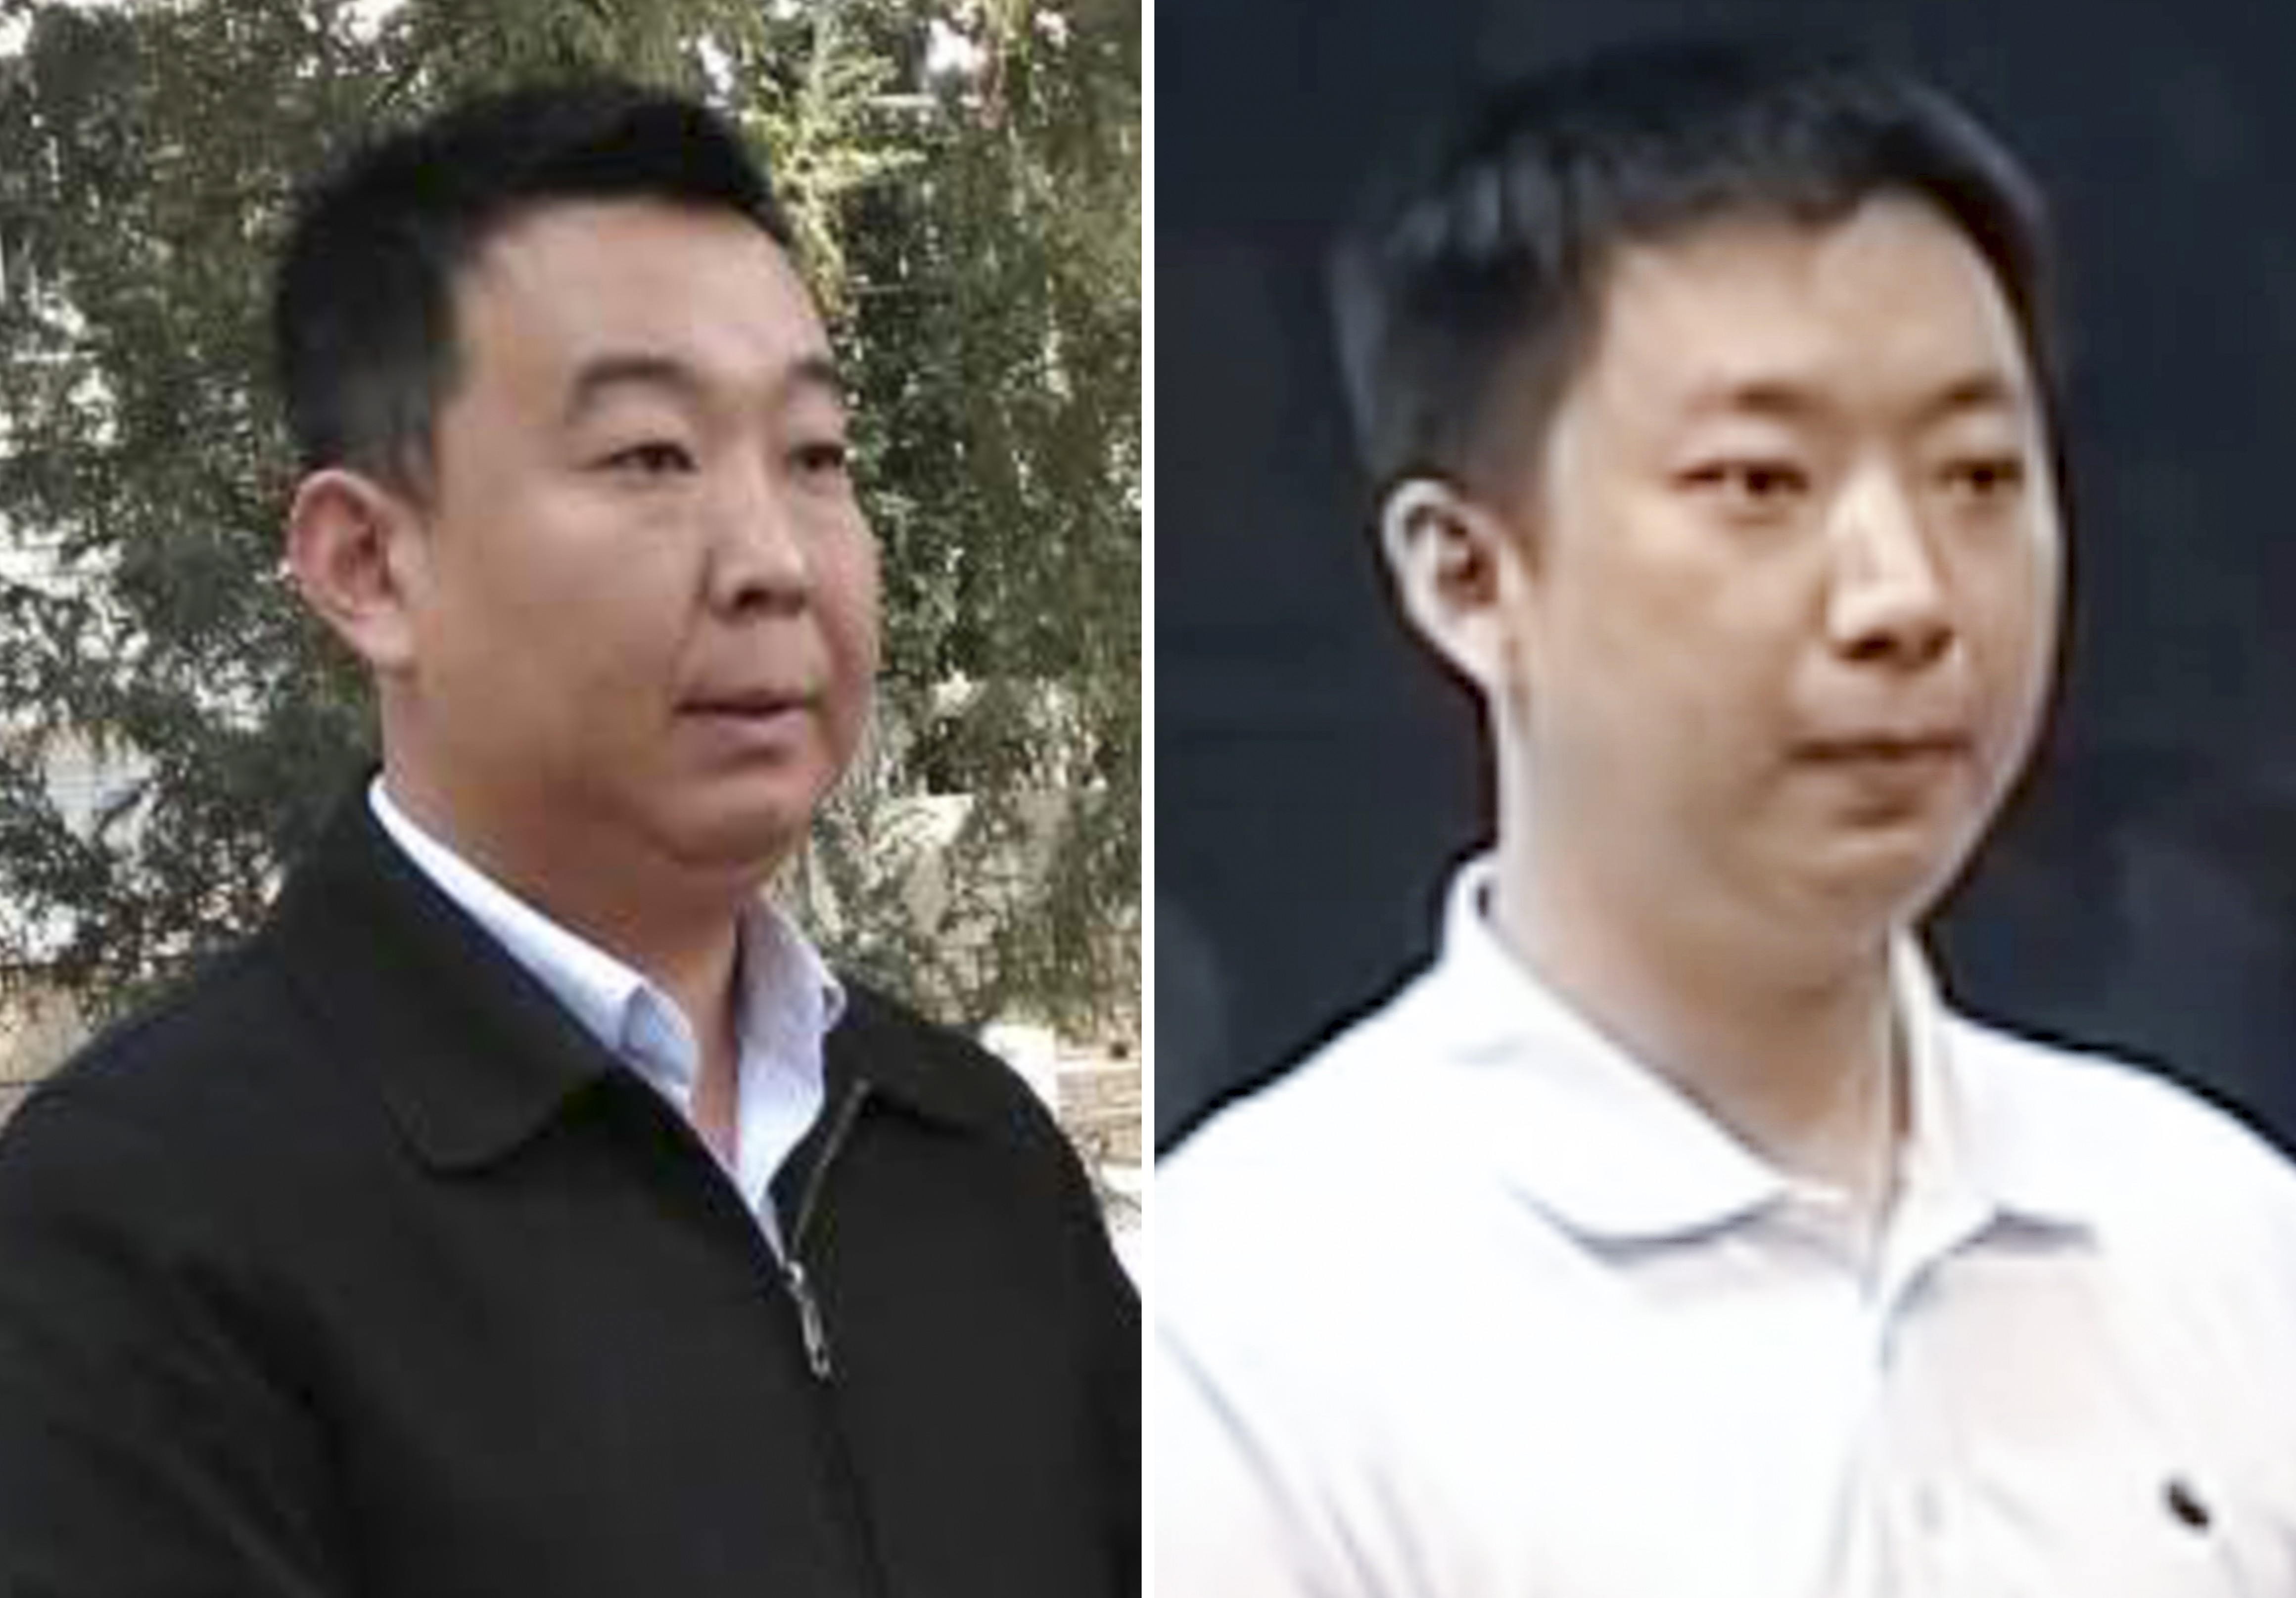 Zhang Xiaojun at the cemetery in Beijing on Monday (left) and during his trial in 2012 in Hefei. Photos: Handout